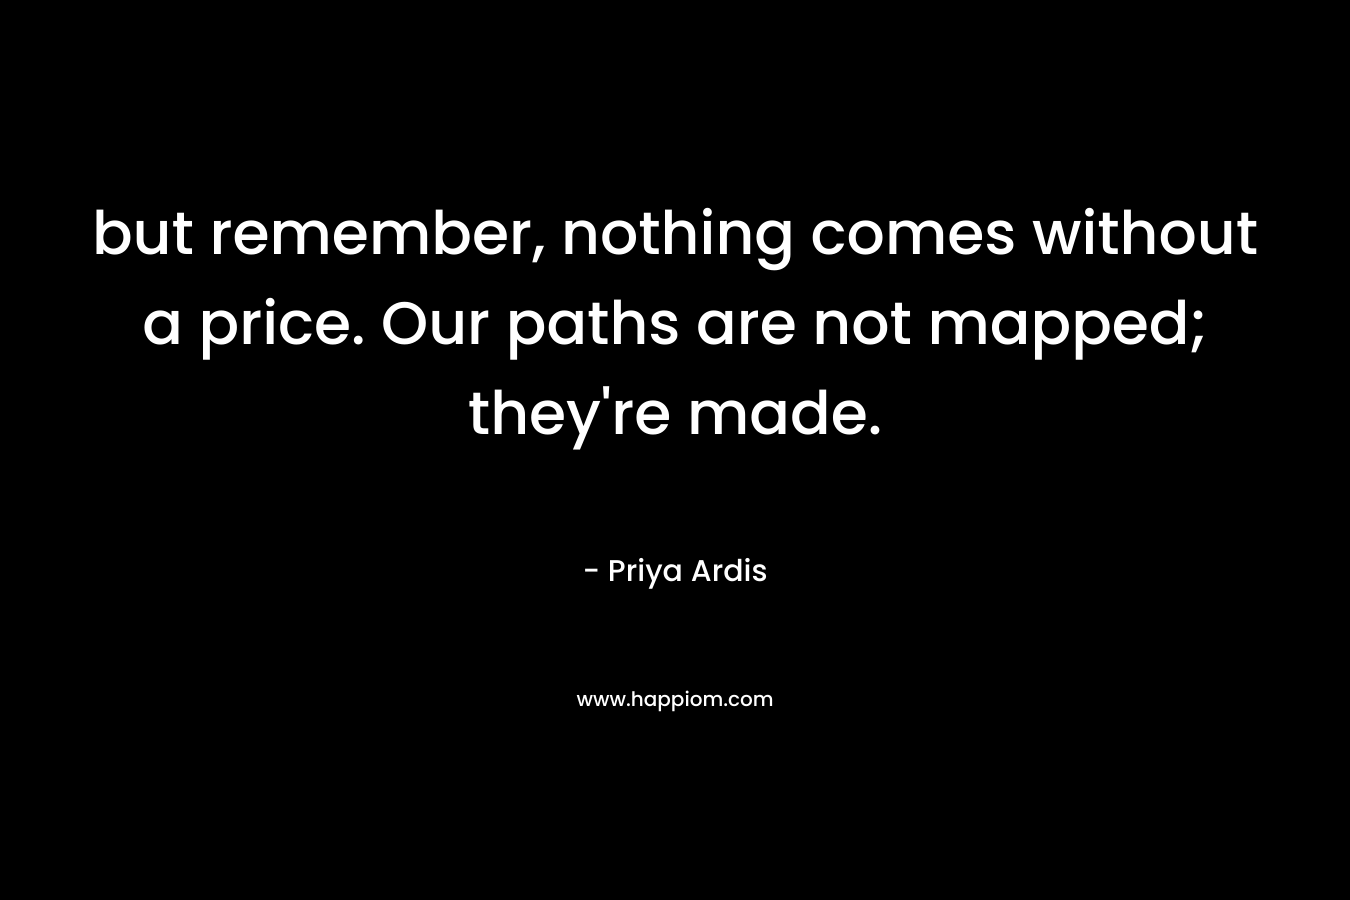 but remember, nothing comes without a price. Our paths are not mapped; they’re made. – Priya Ardis